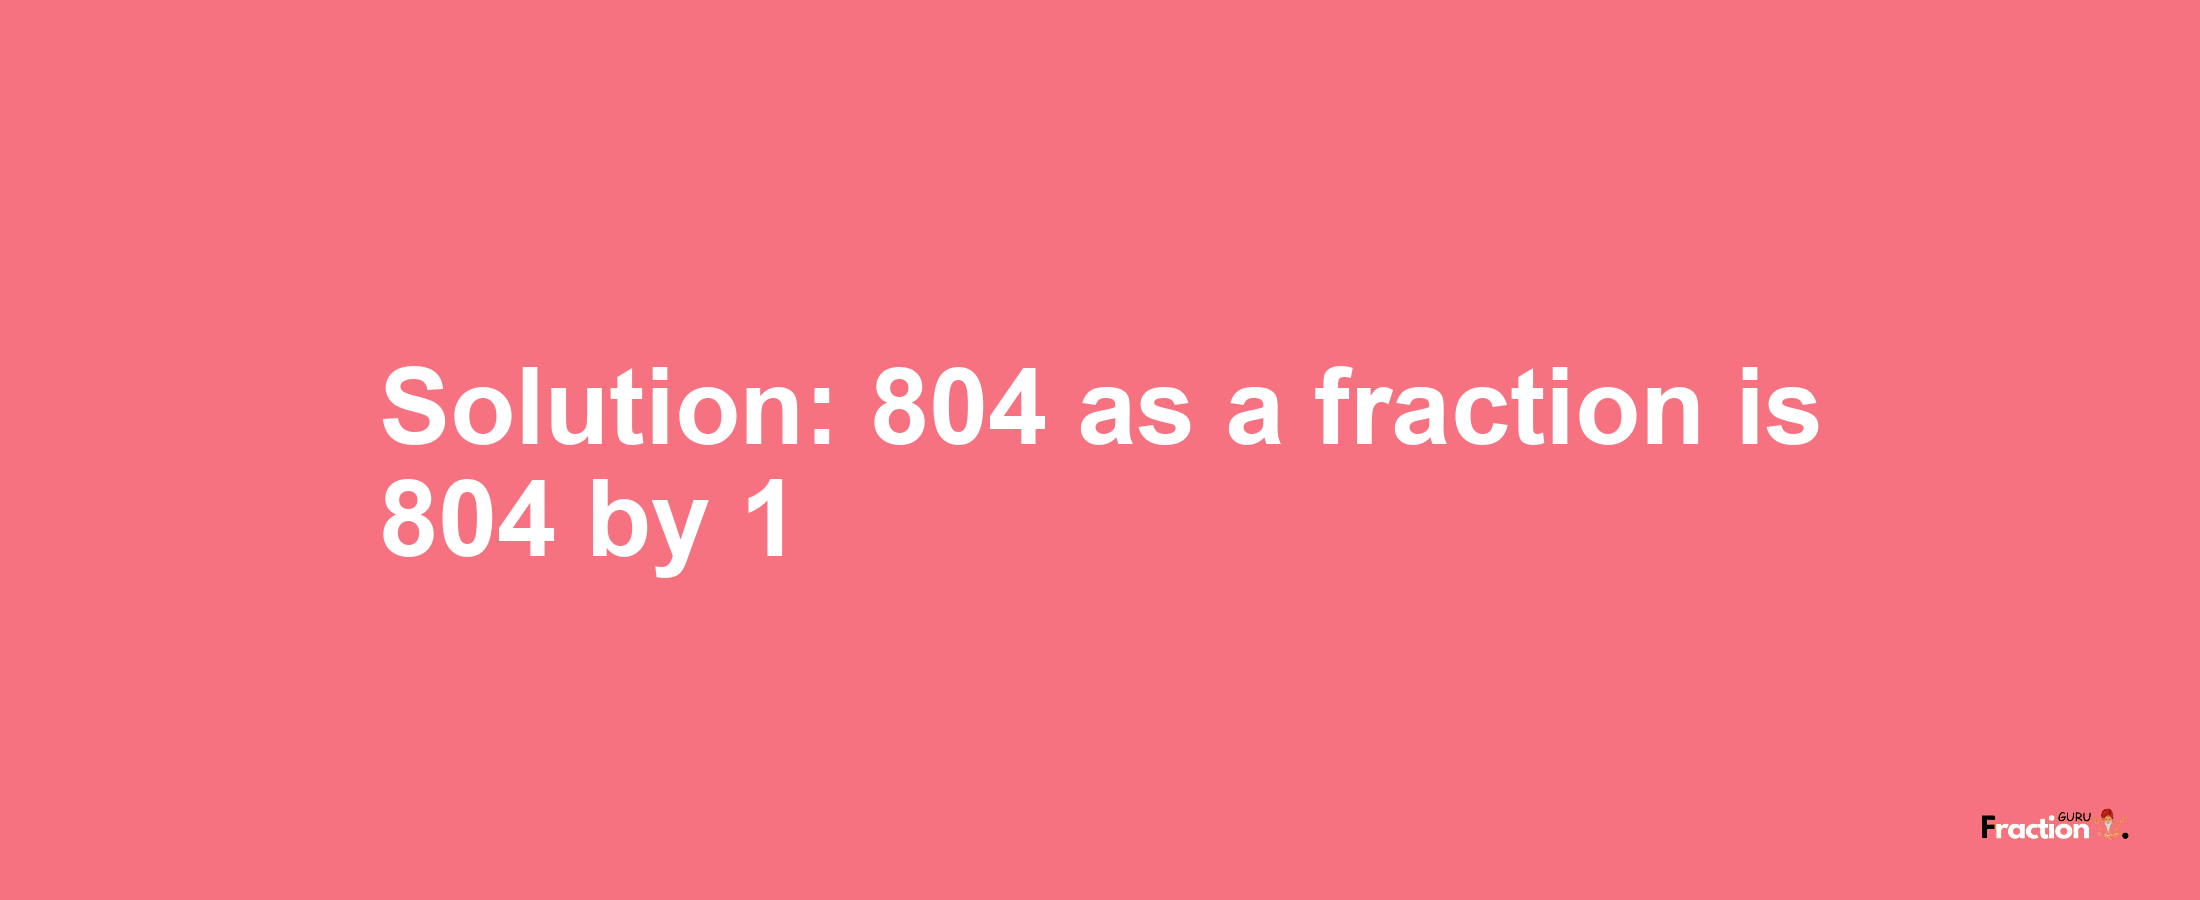 Solution:804 as a fraction is 804/1